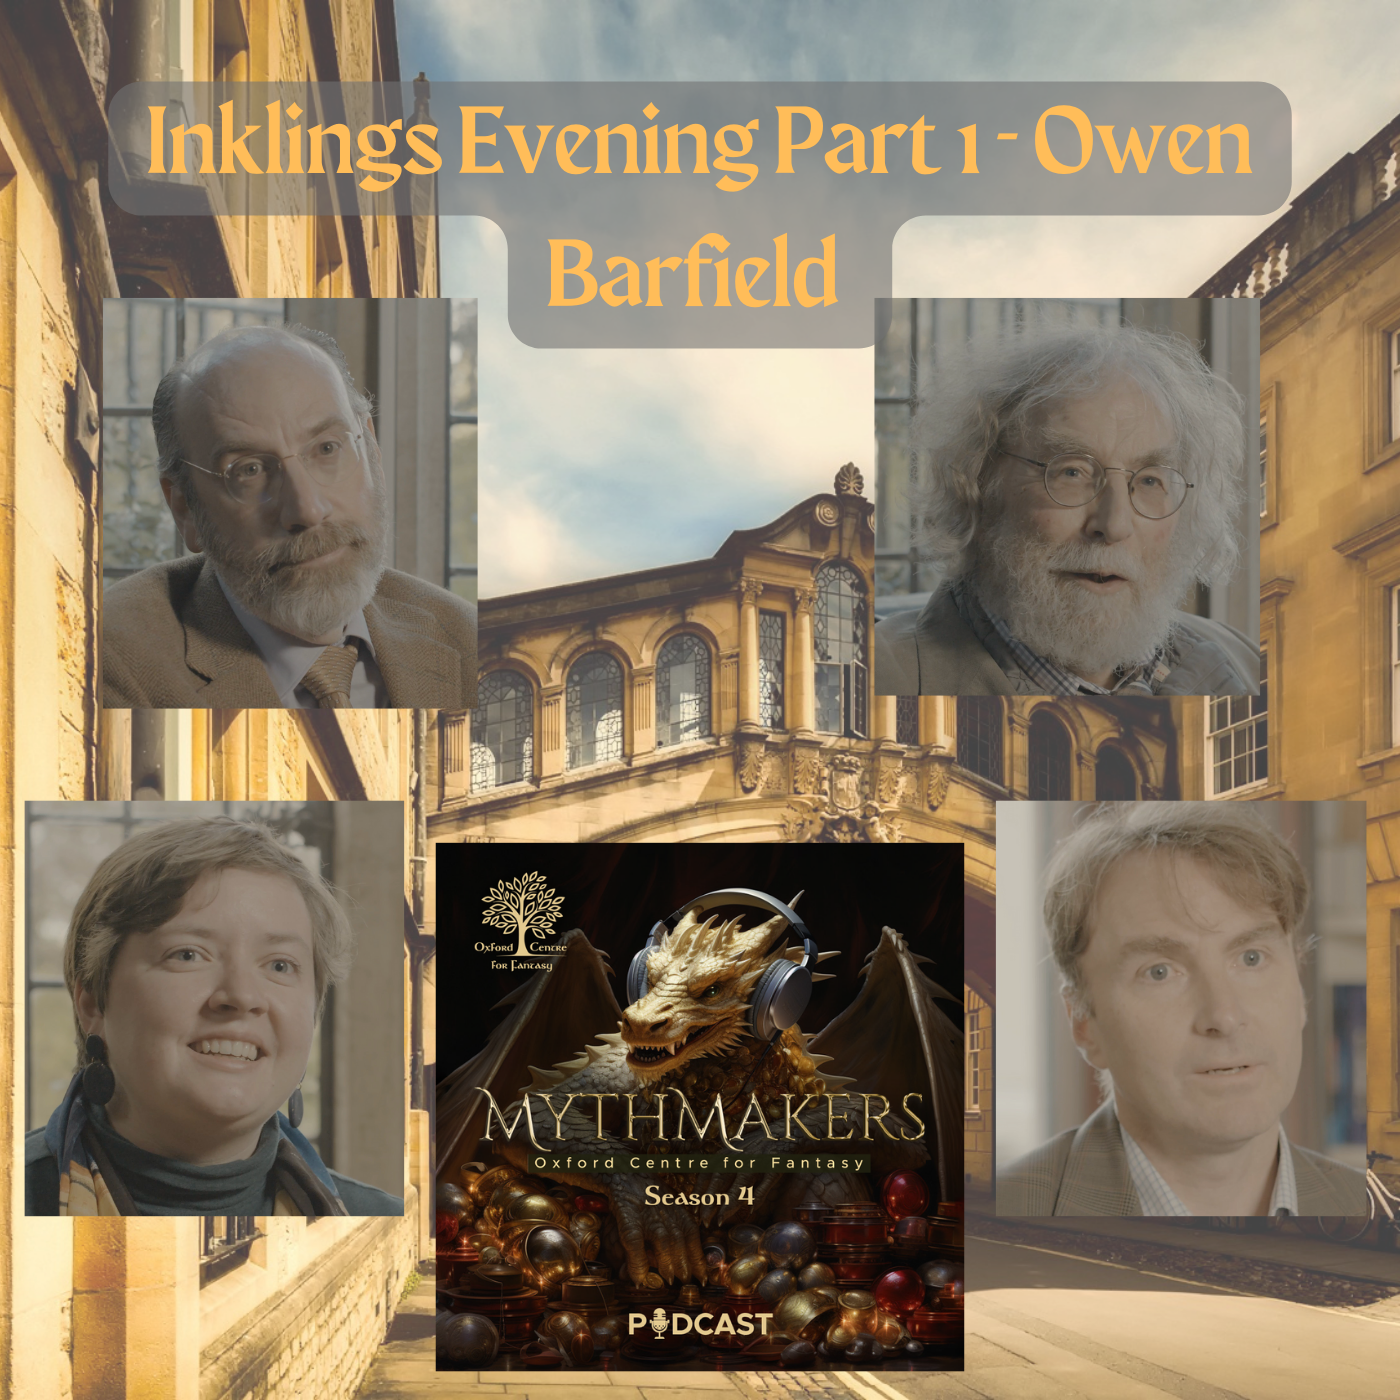 An Evening with the Inklings - Owen Barfield